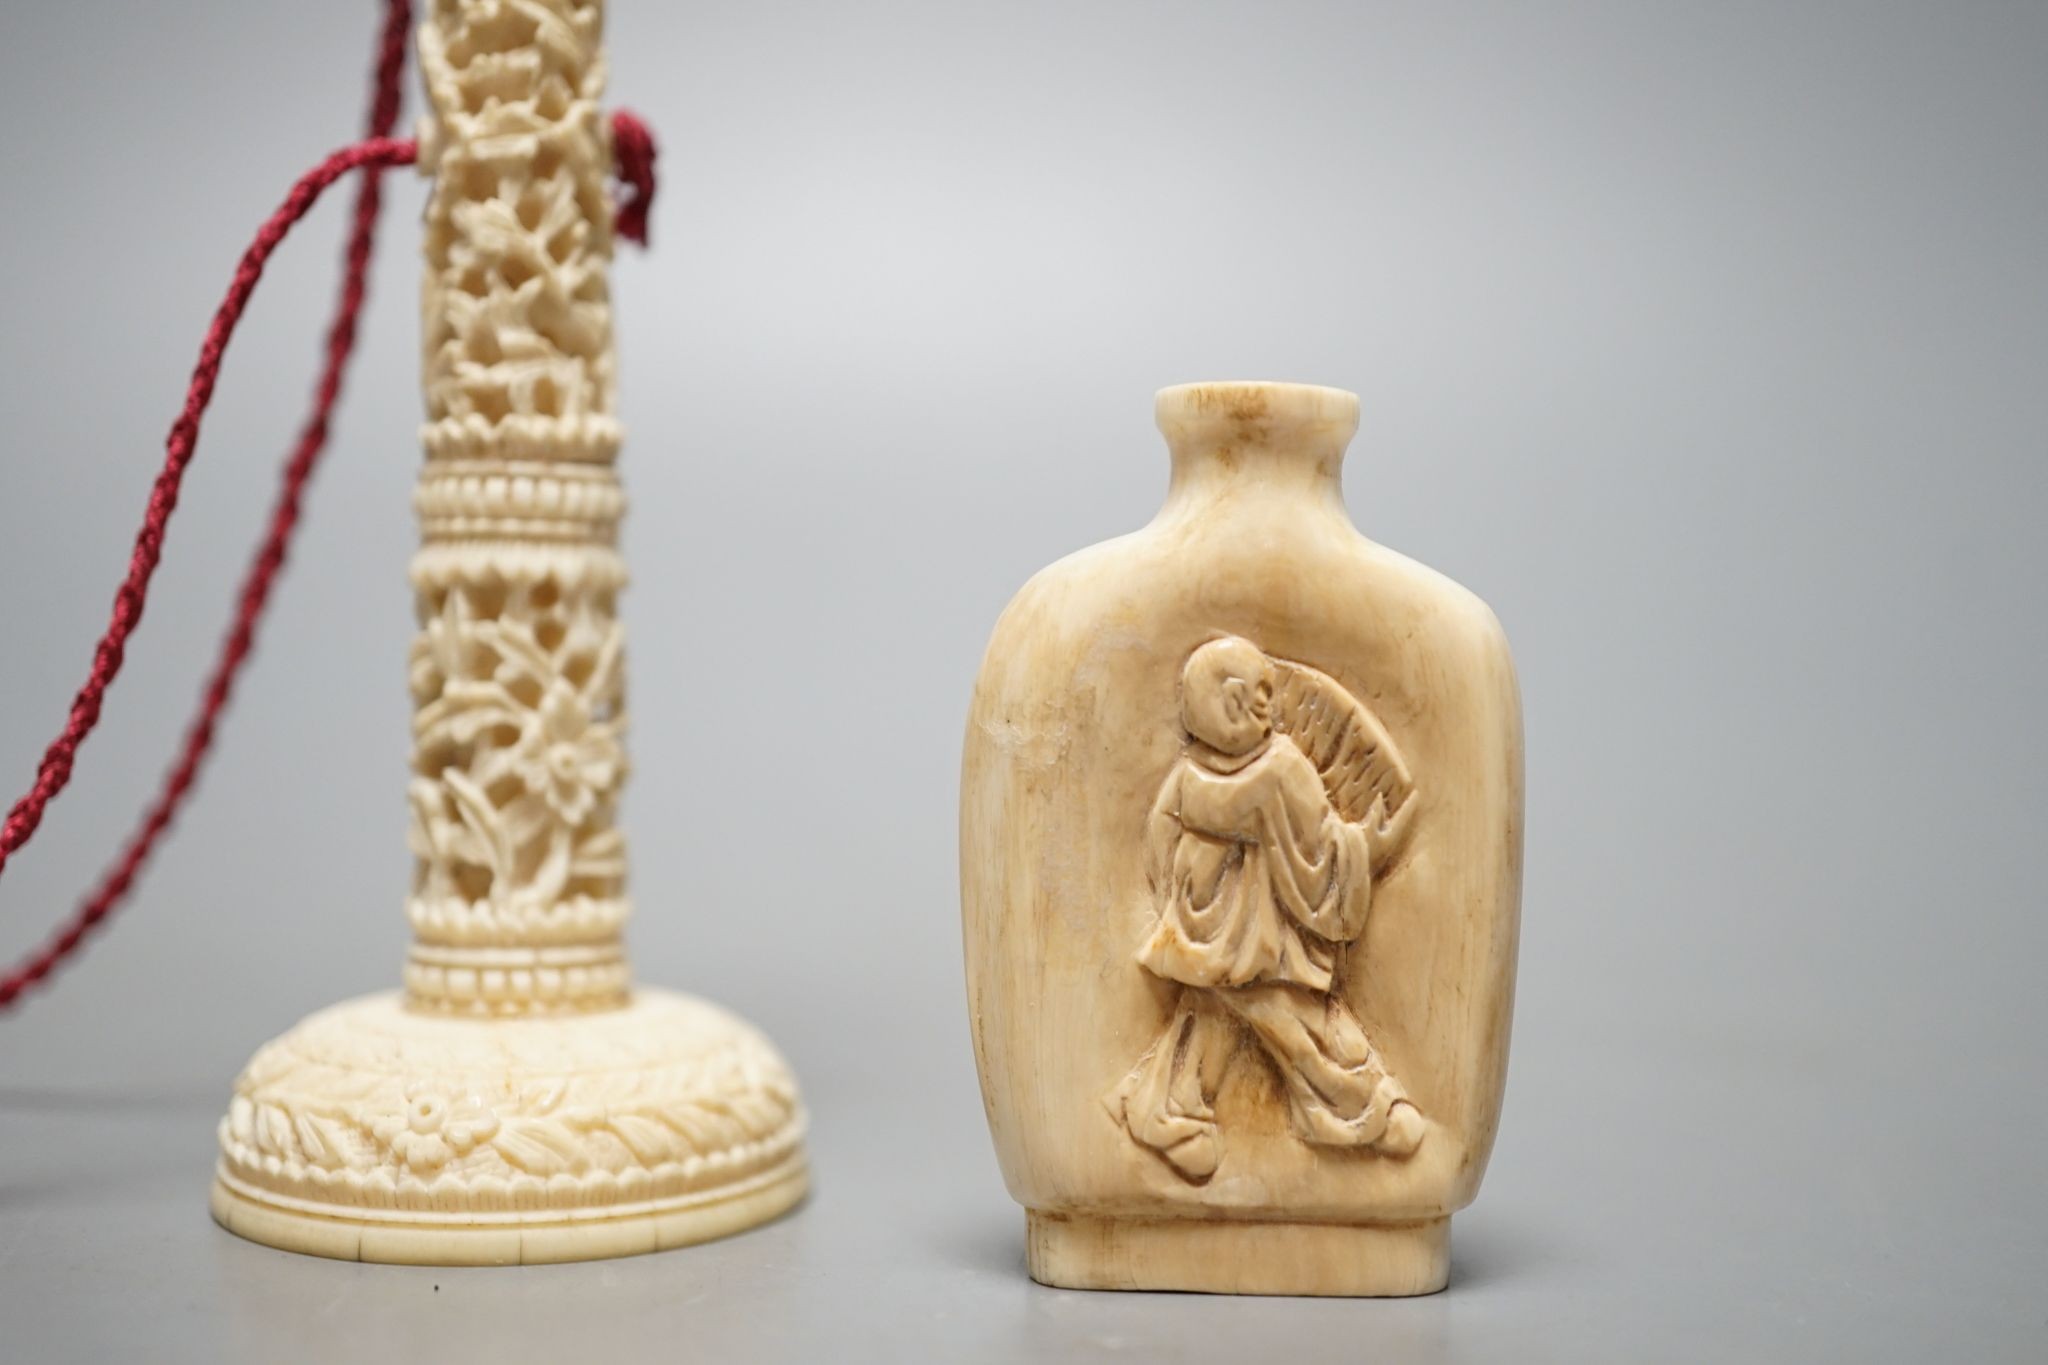 A Chinese export ivory spike and ball game, 16.5cm, and an ivory snuff bottle